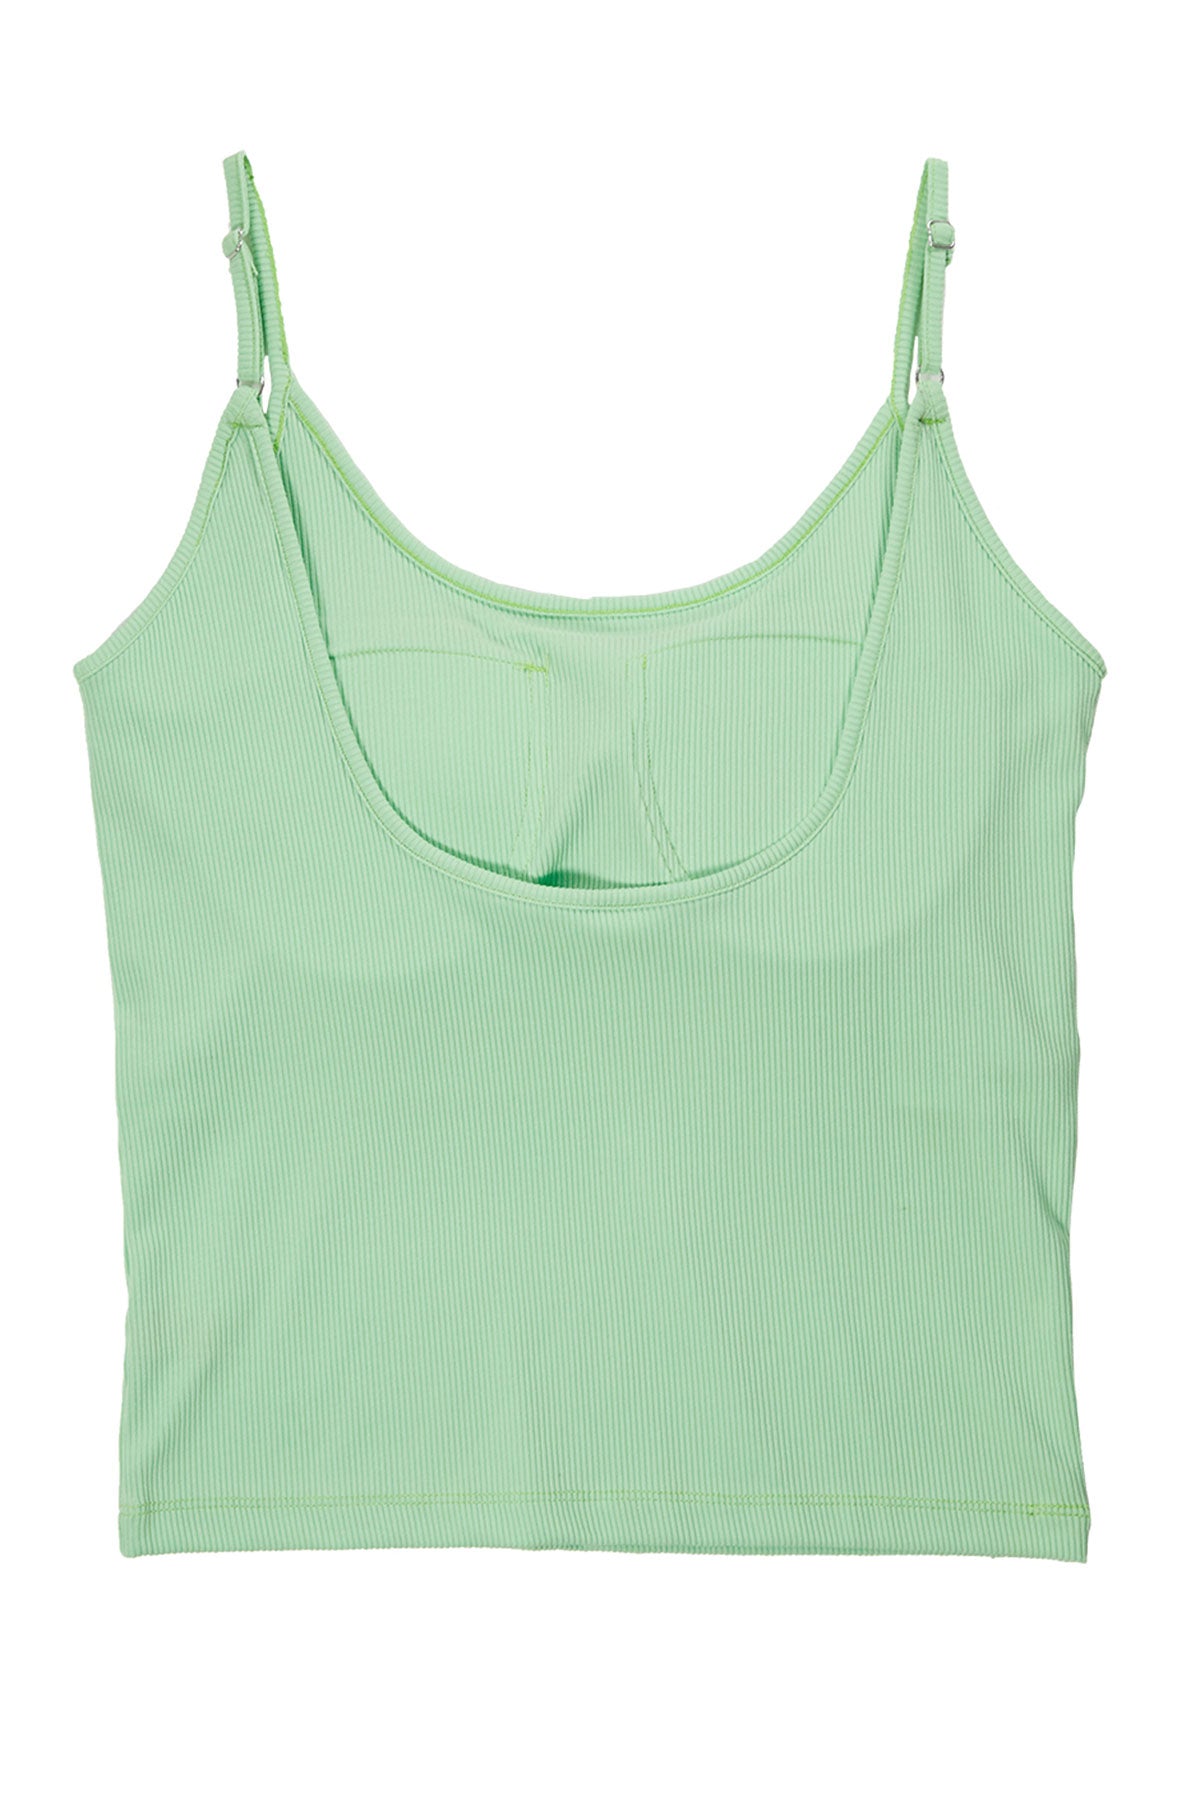 Sister's Bra Cup Camisole / Green